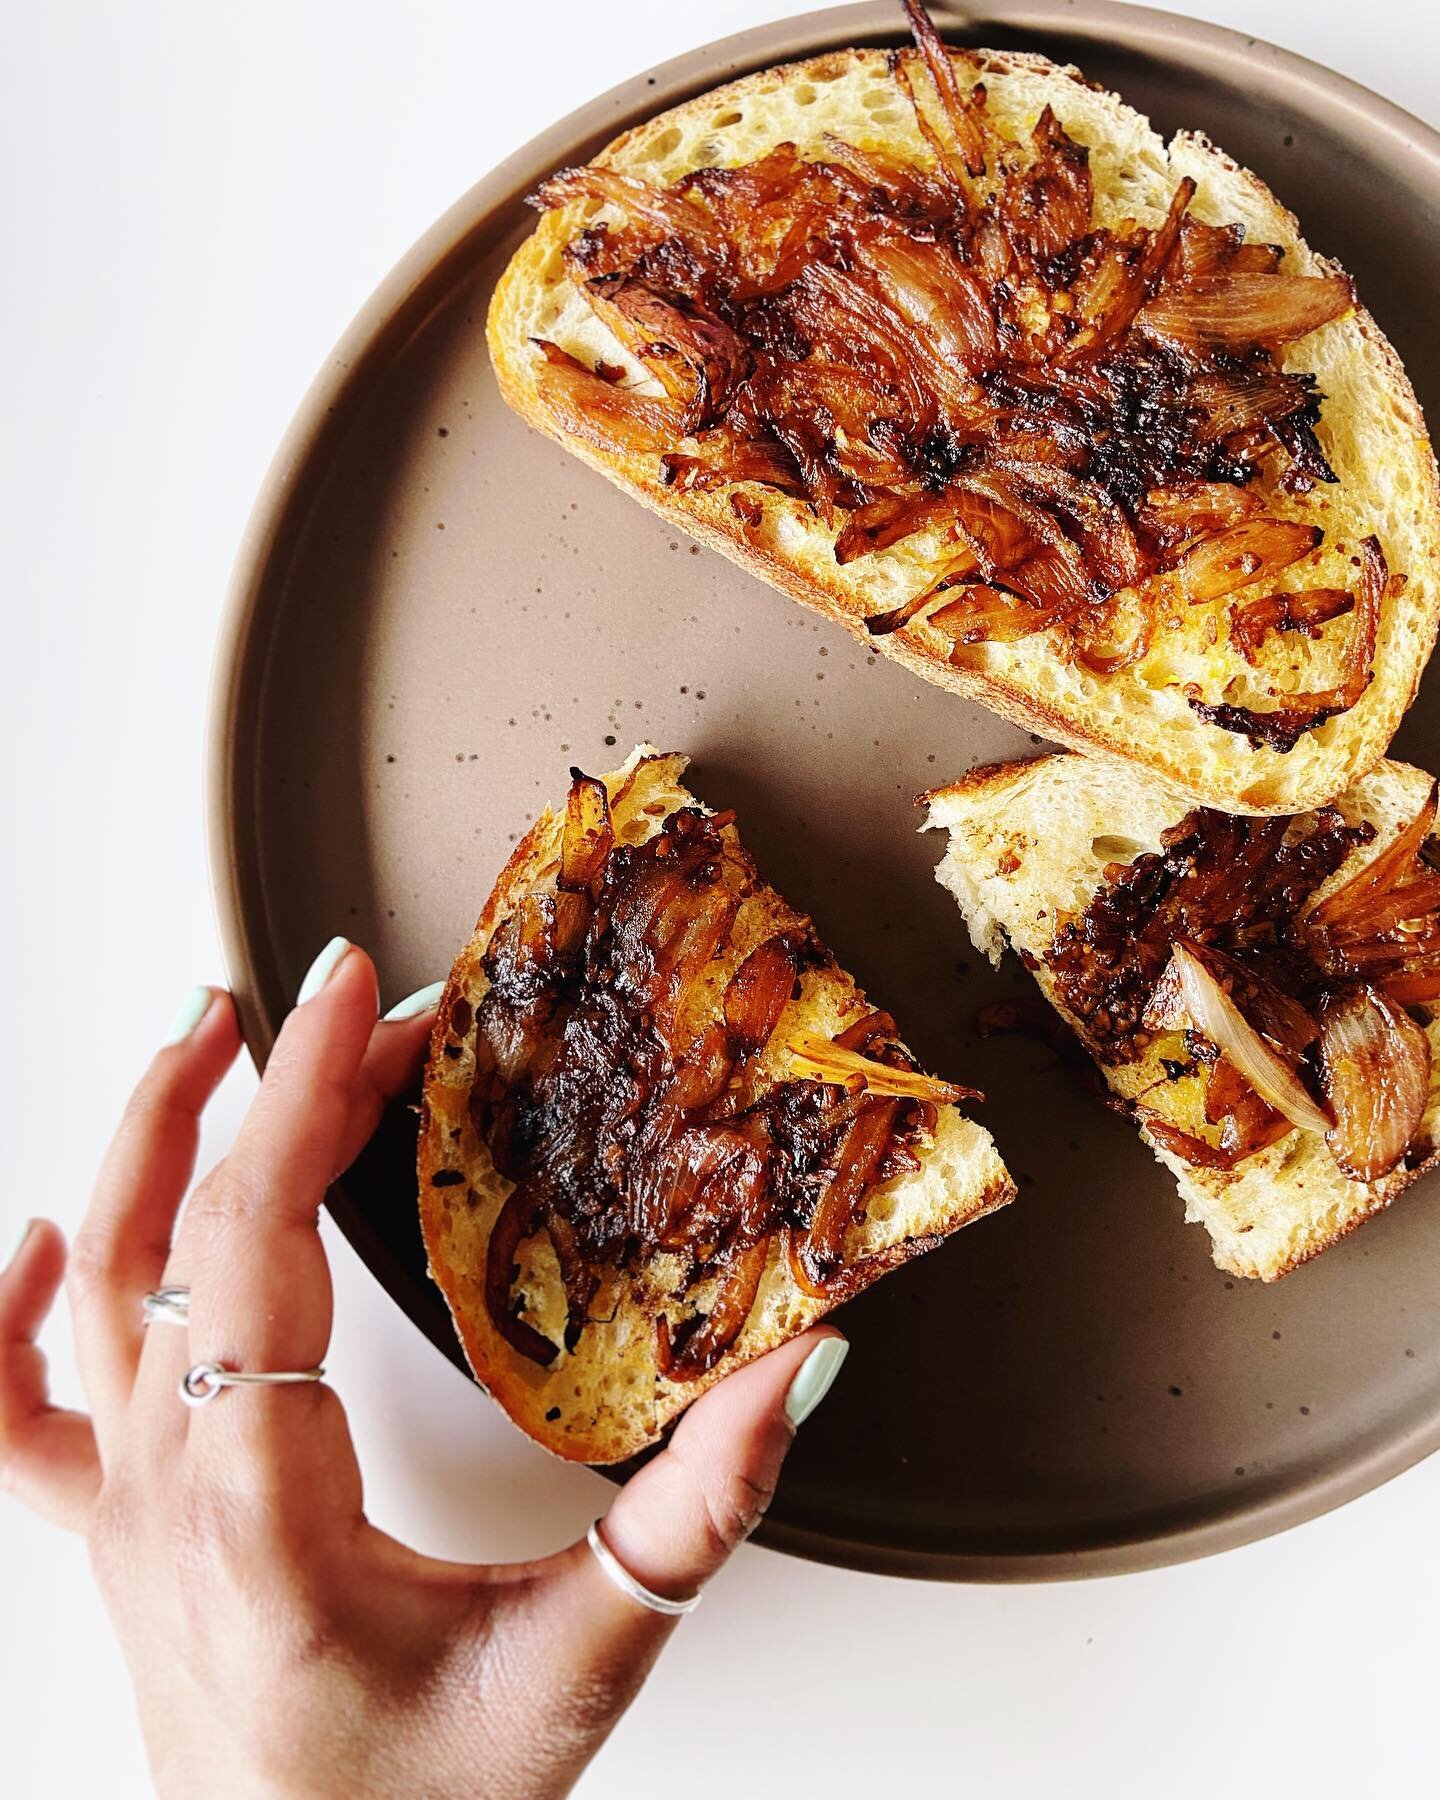 French Onion Toast: for when you&rsquo;re craving French onion soup but can&rsquo;t be bothered to labor through that entire process. This toast is like the fancy elder cousin of garlic bread &amp; it&rsquo;s made with just a few simple ingredients (